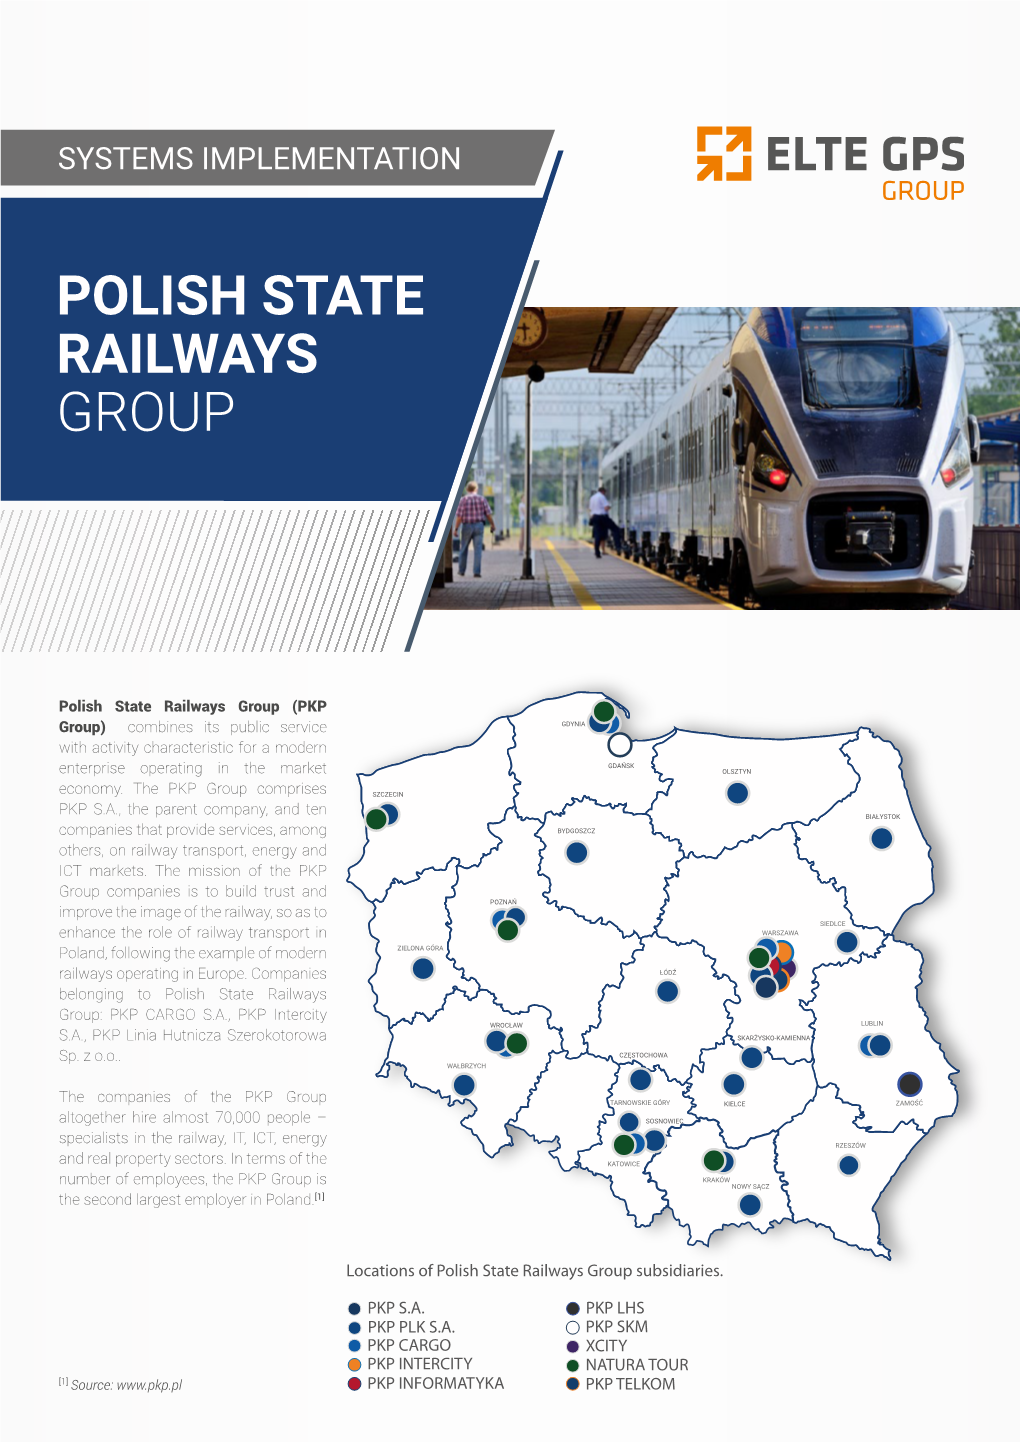 Implementation for Polish State Railways Group